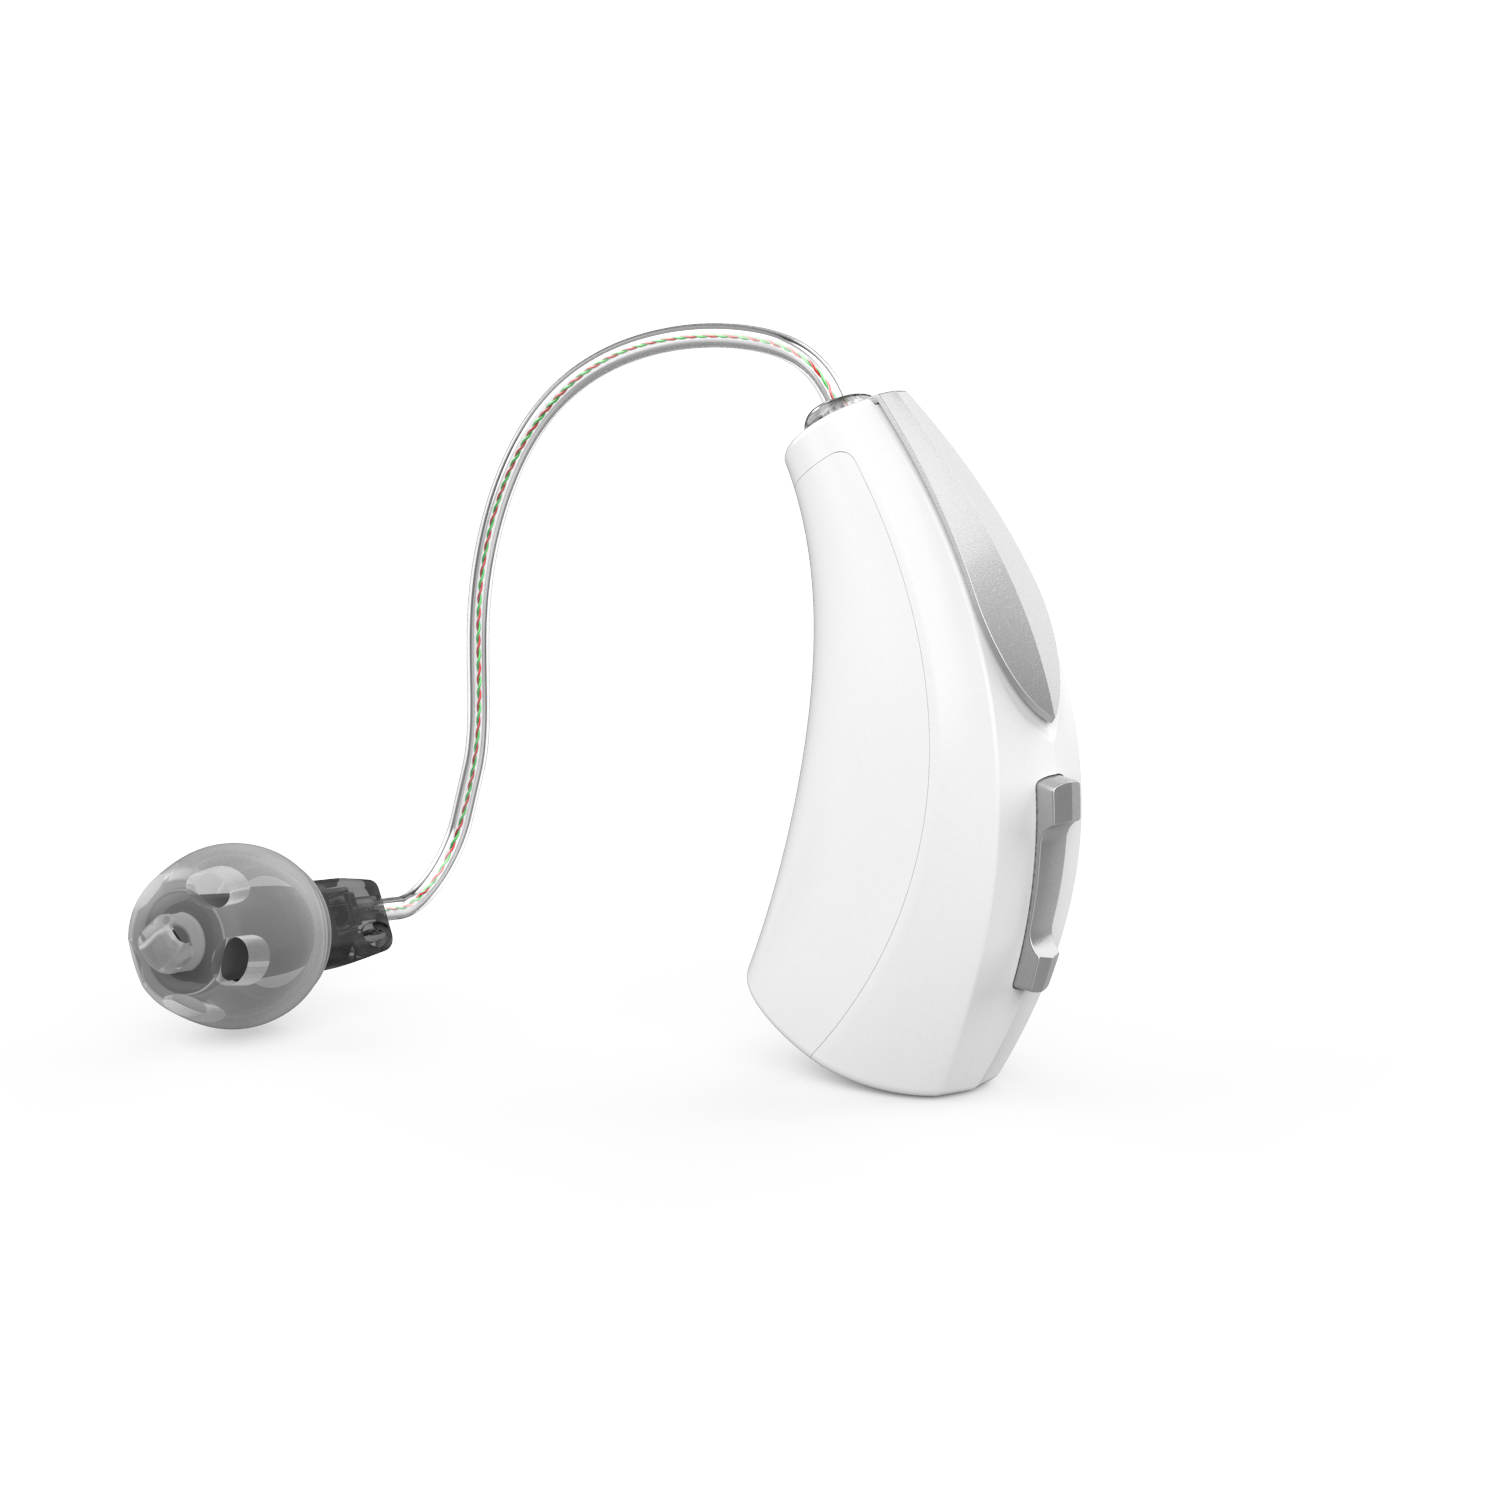 About Starkey Hearing Aids and How They Can Help Hearing Loss